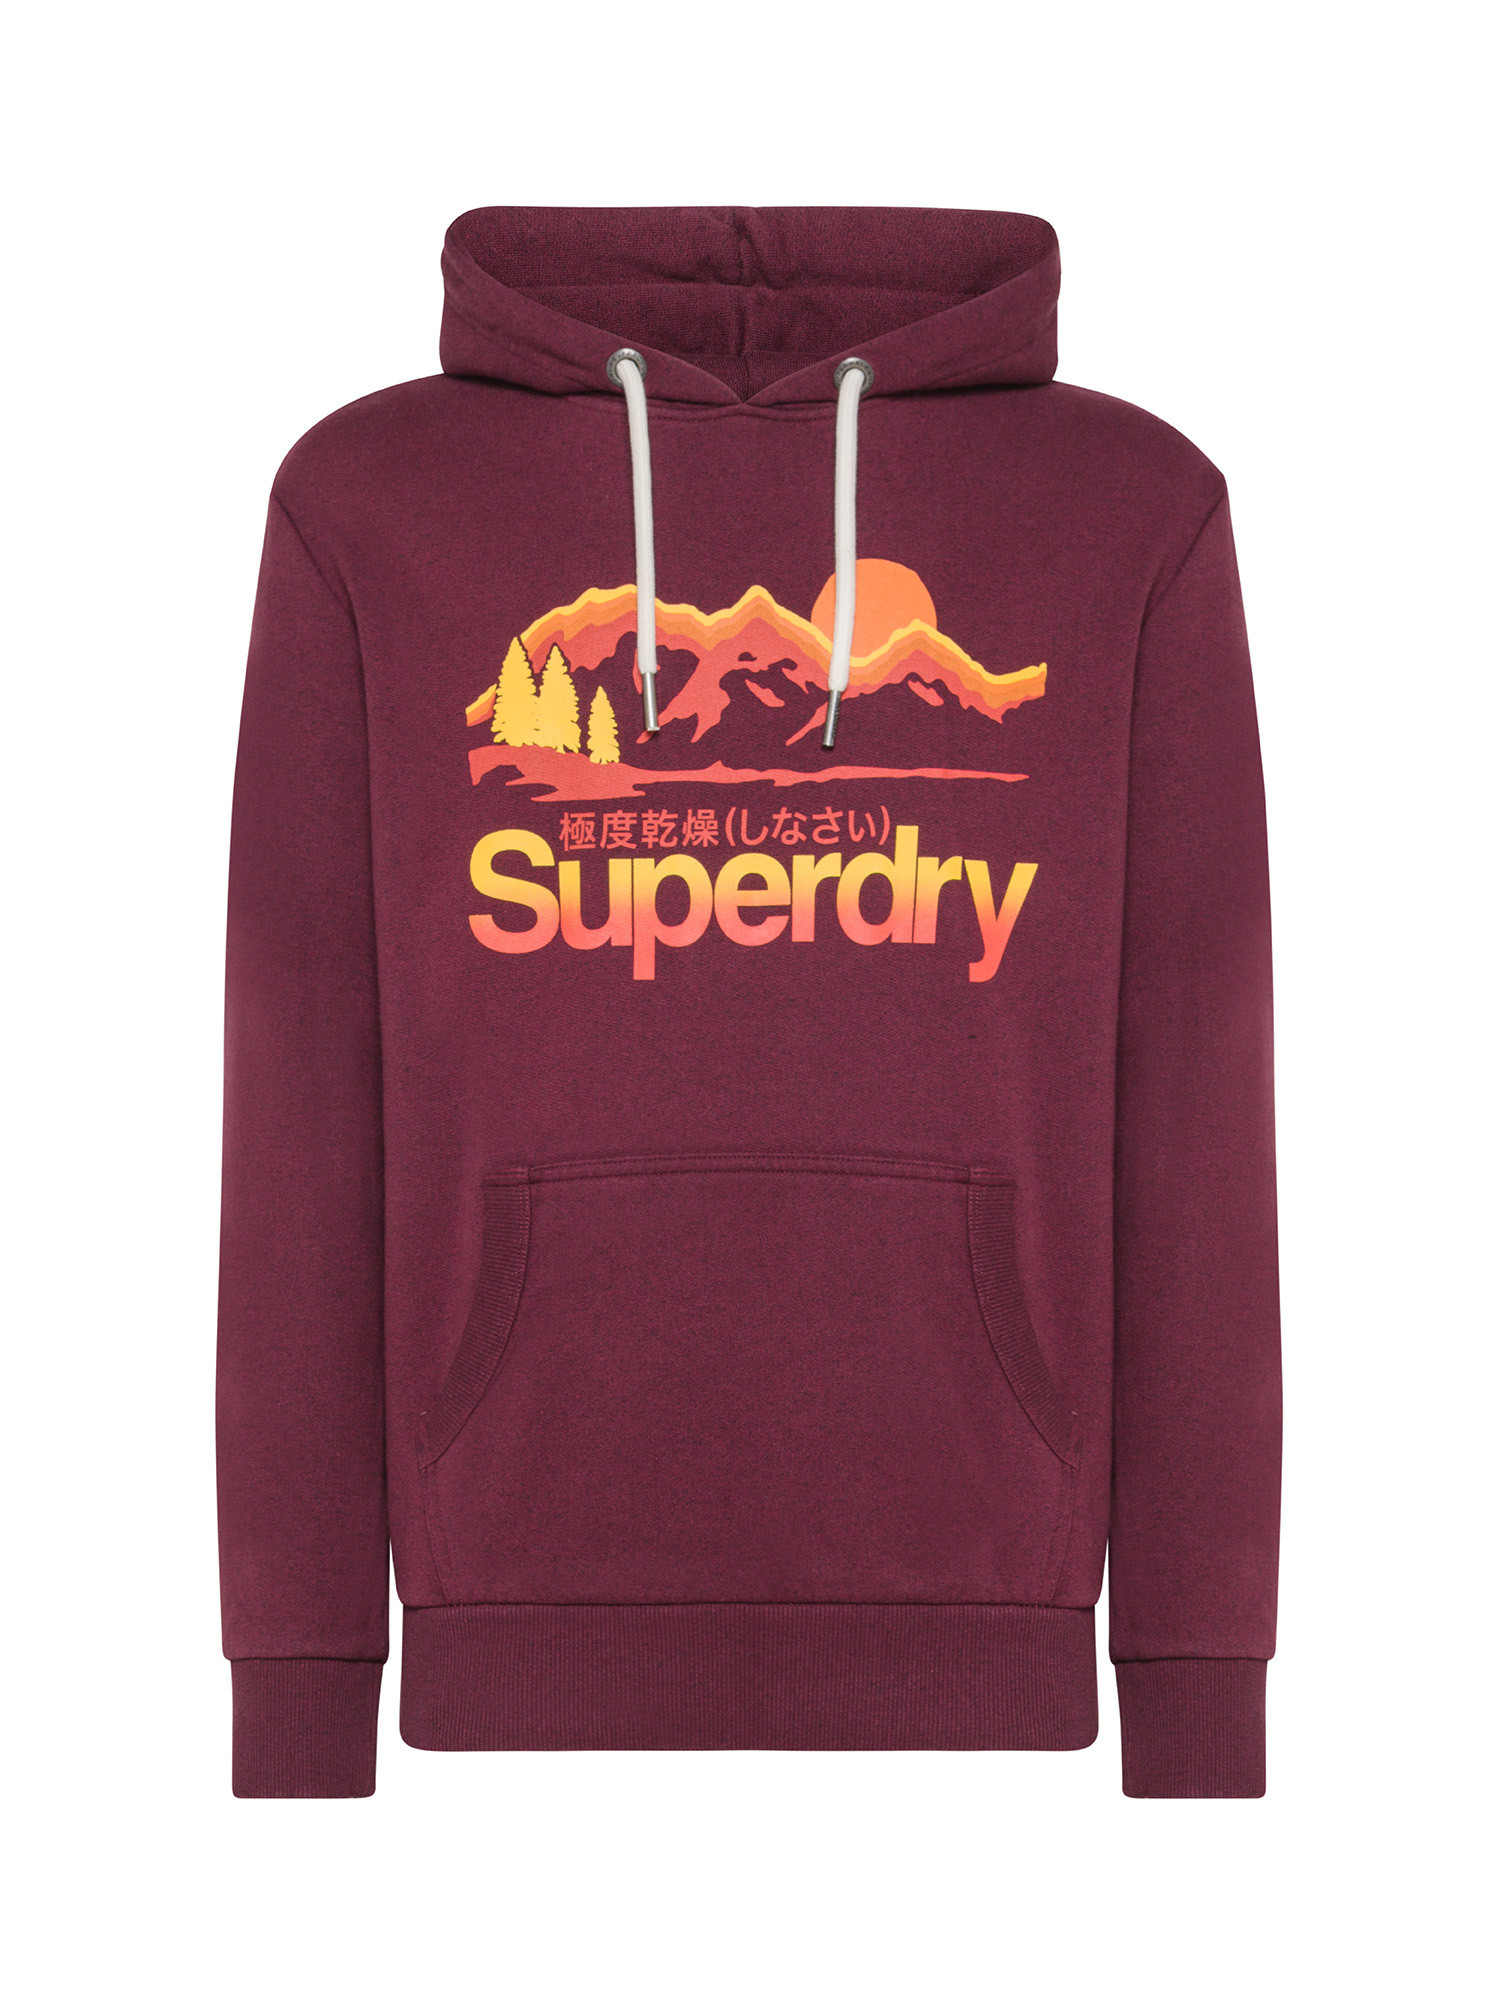 Superdry - Hooded sweatshirt with logo, Red Bordeaux, large image number 0